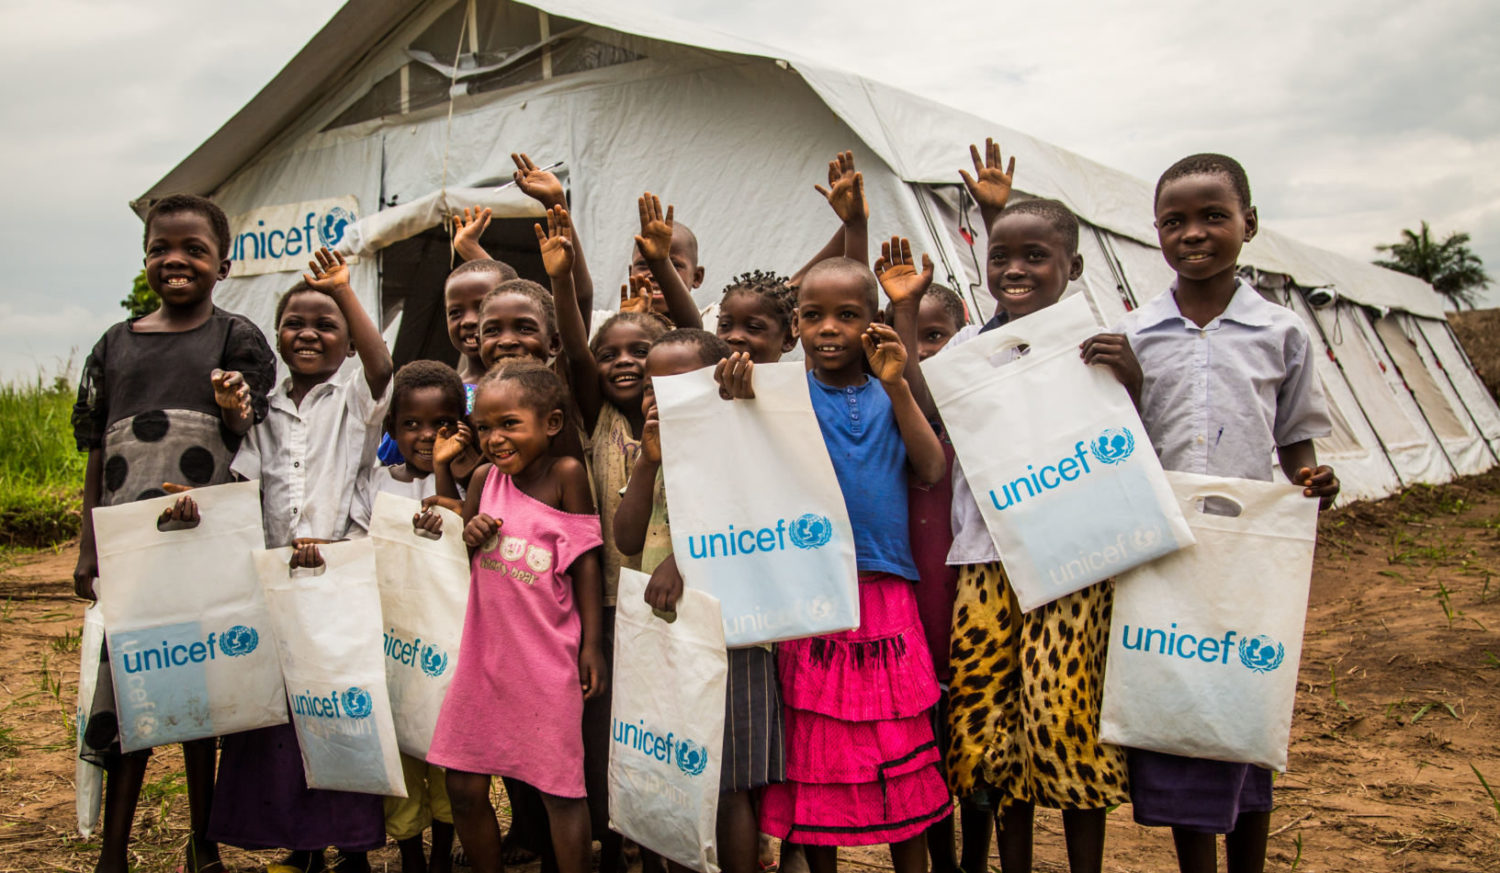 Students stand outside their temporary tent school setup by UNICEF, following a class in Mulombela village, Kasaï region, Democratic Republic of the Congo,